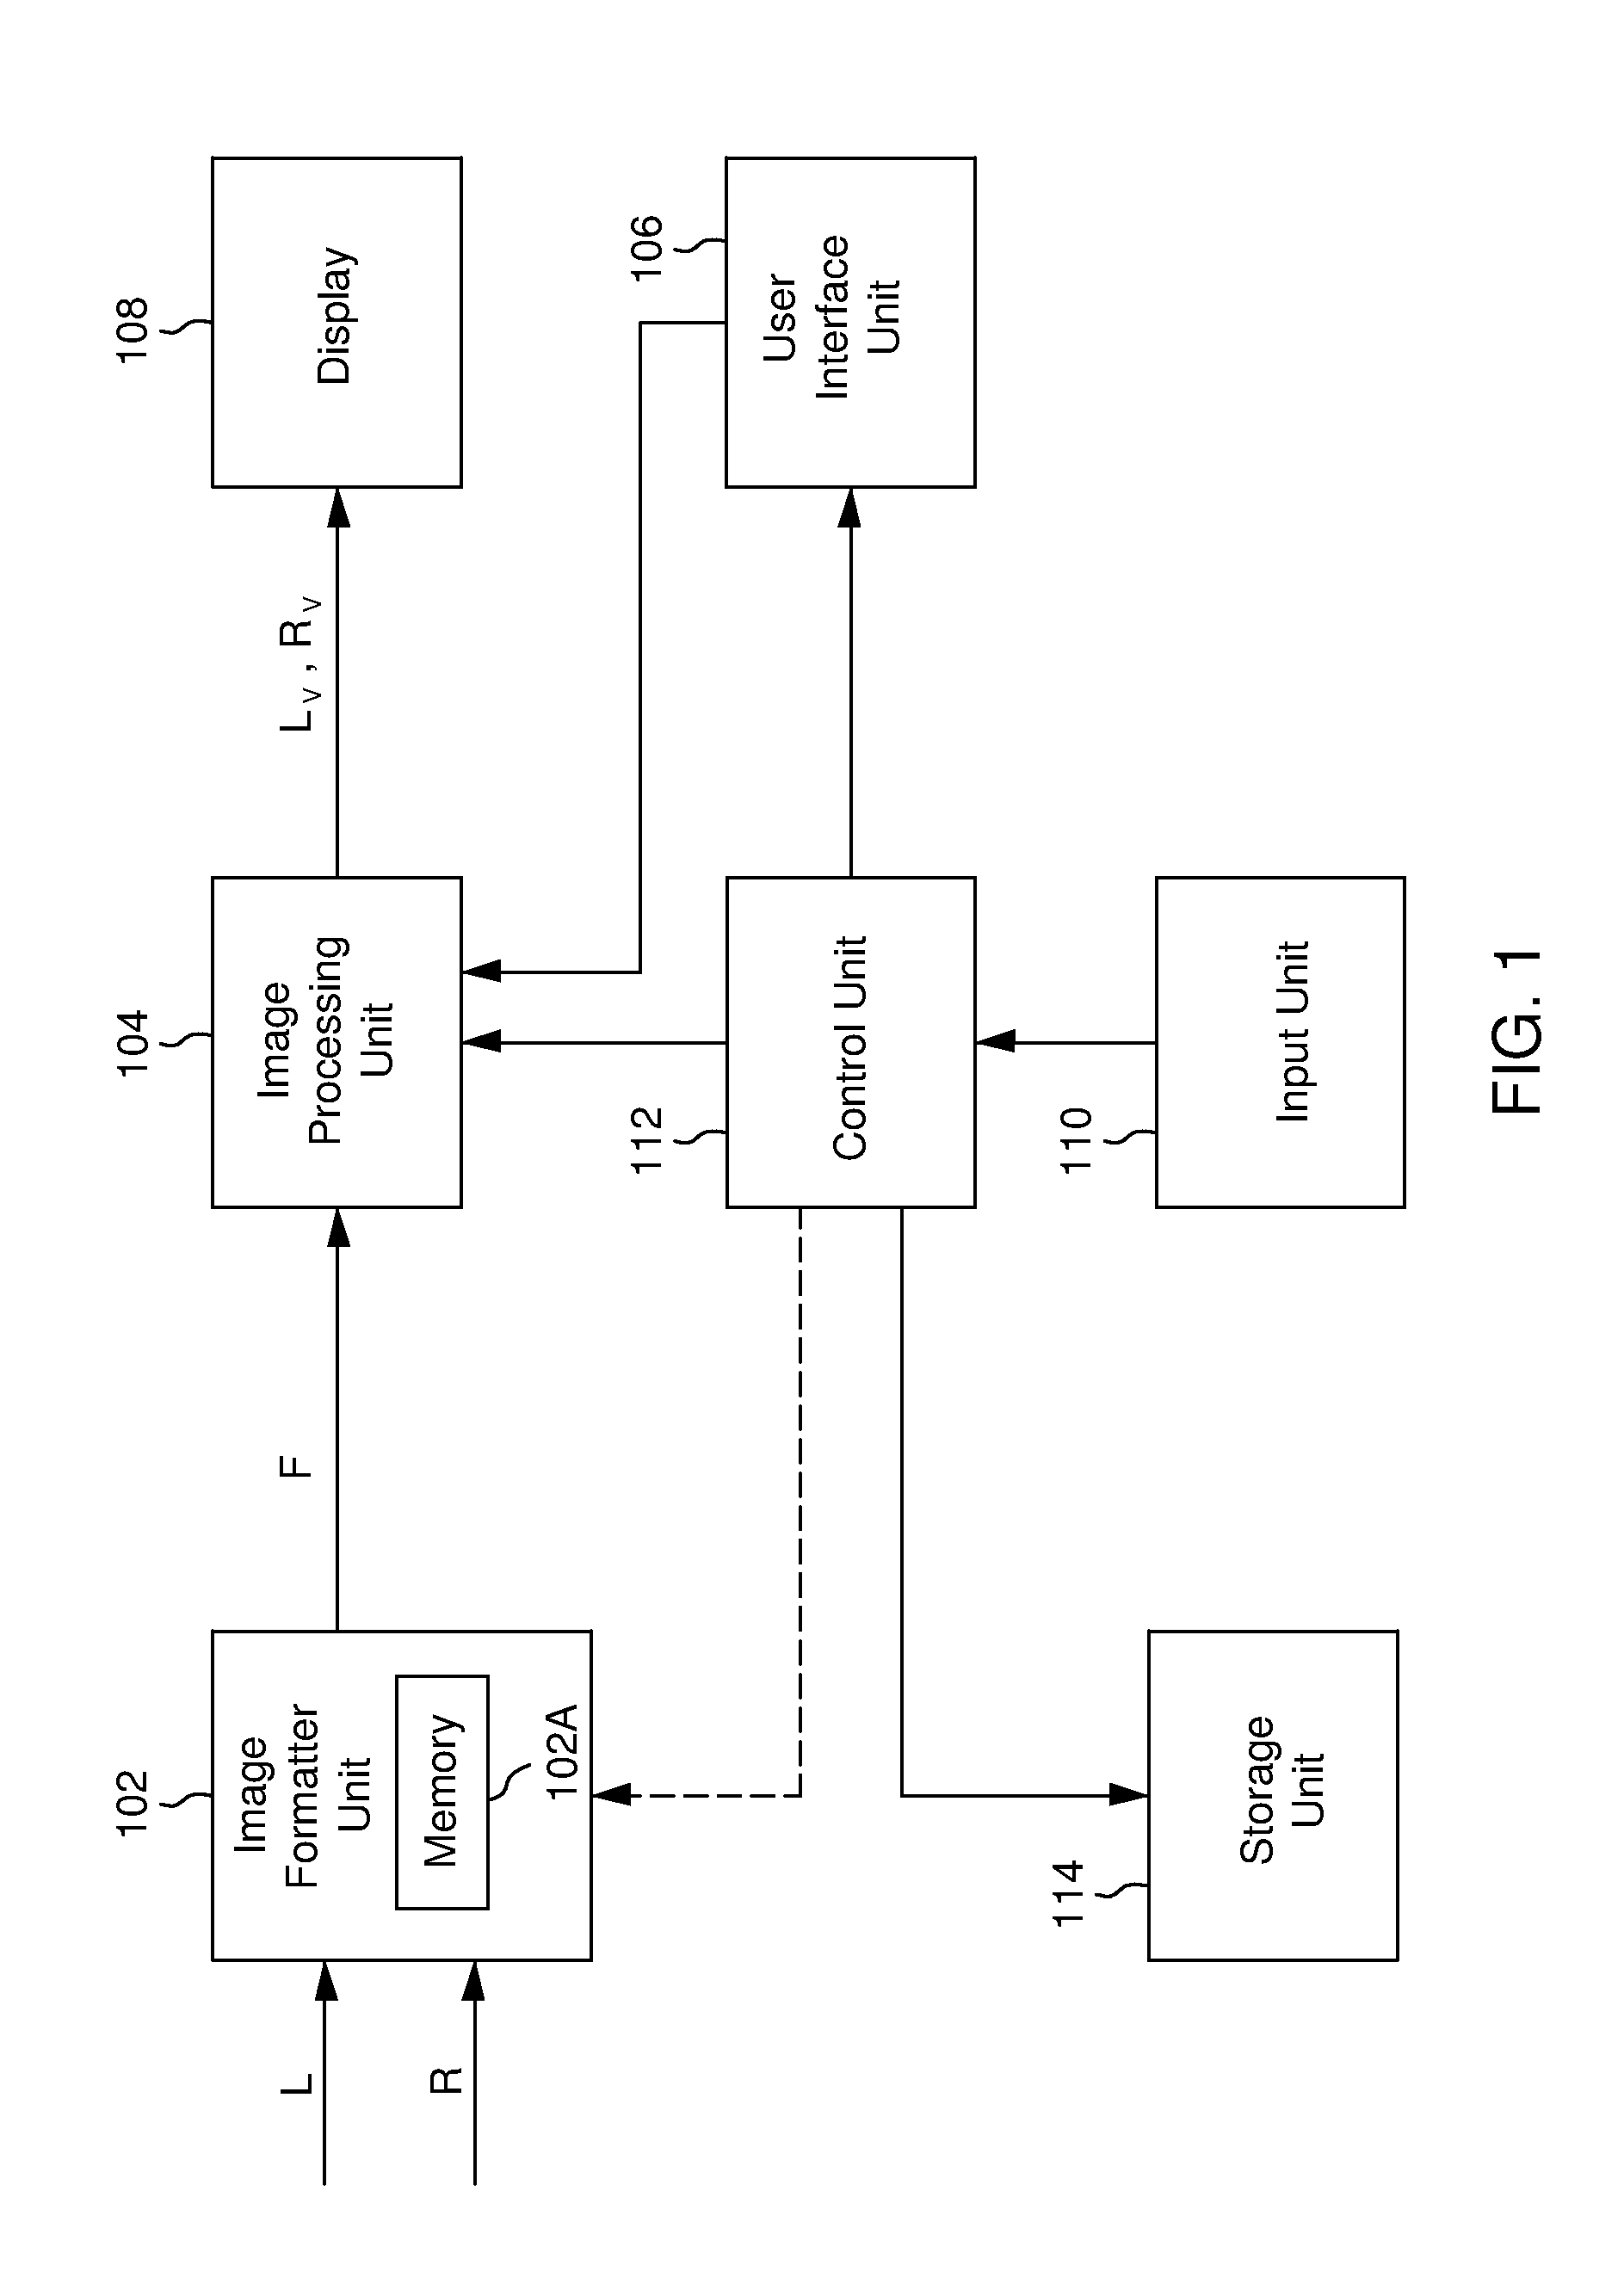 System and Method of Rendering Stereoscopic Images